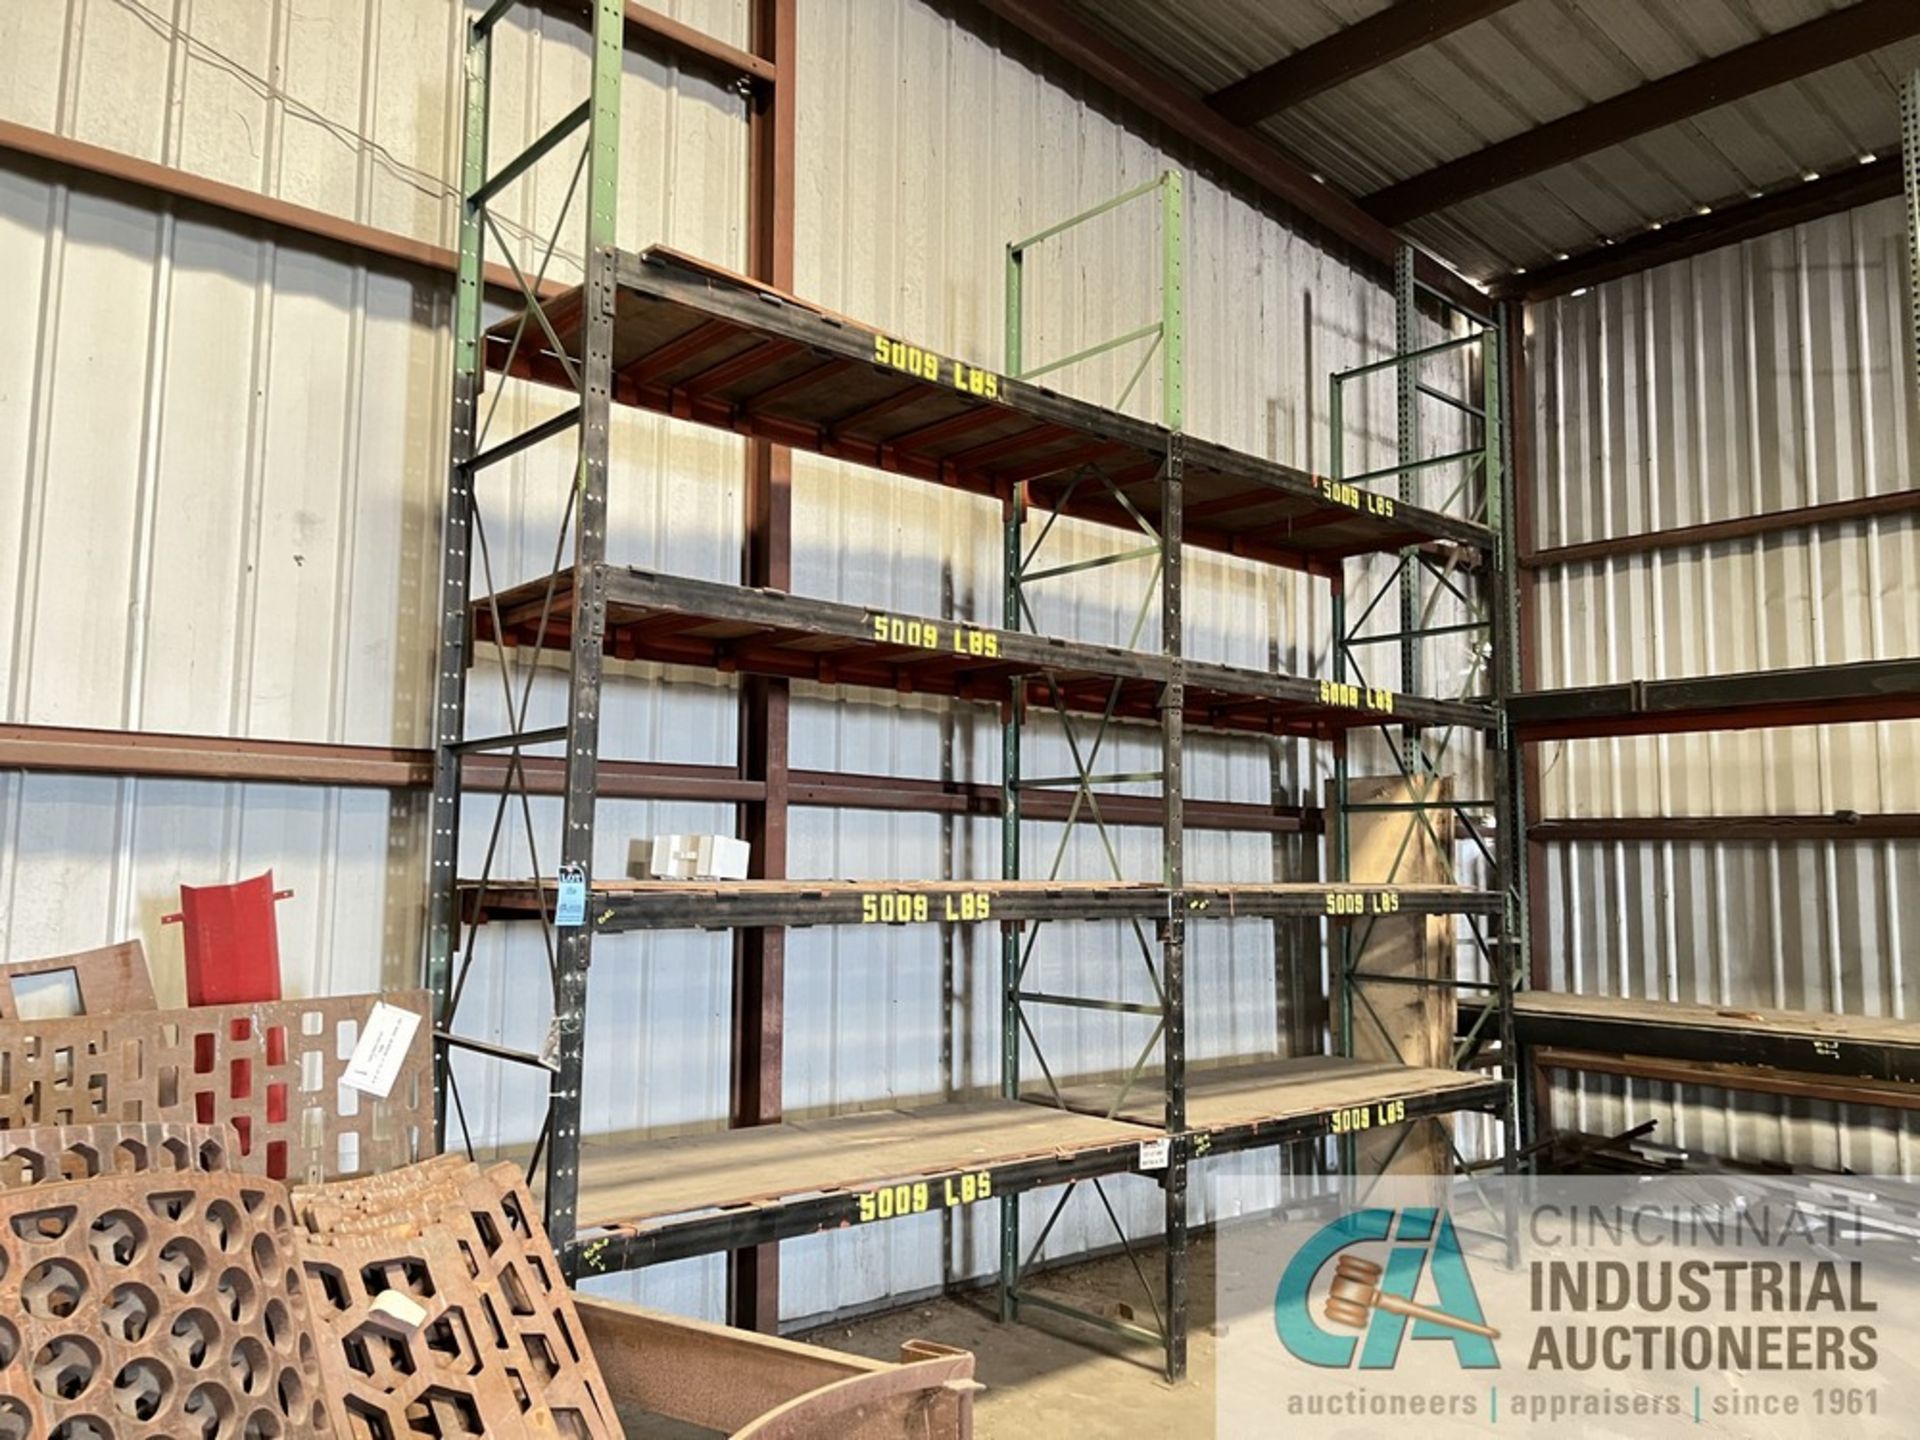 SECTIONS 96" X 36" X 188" BOLT TOGETHER ADJUSTABLE BEAM PALLET RACK WITH 93) 36" X 188" UPRIGHTS AND